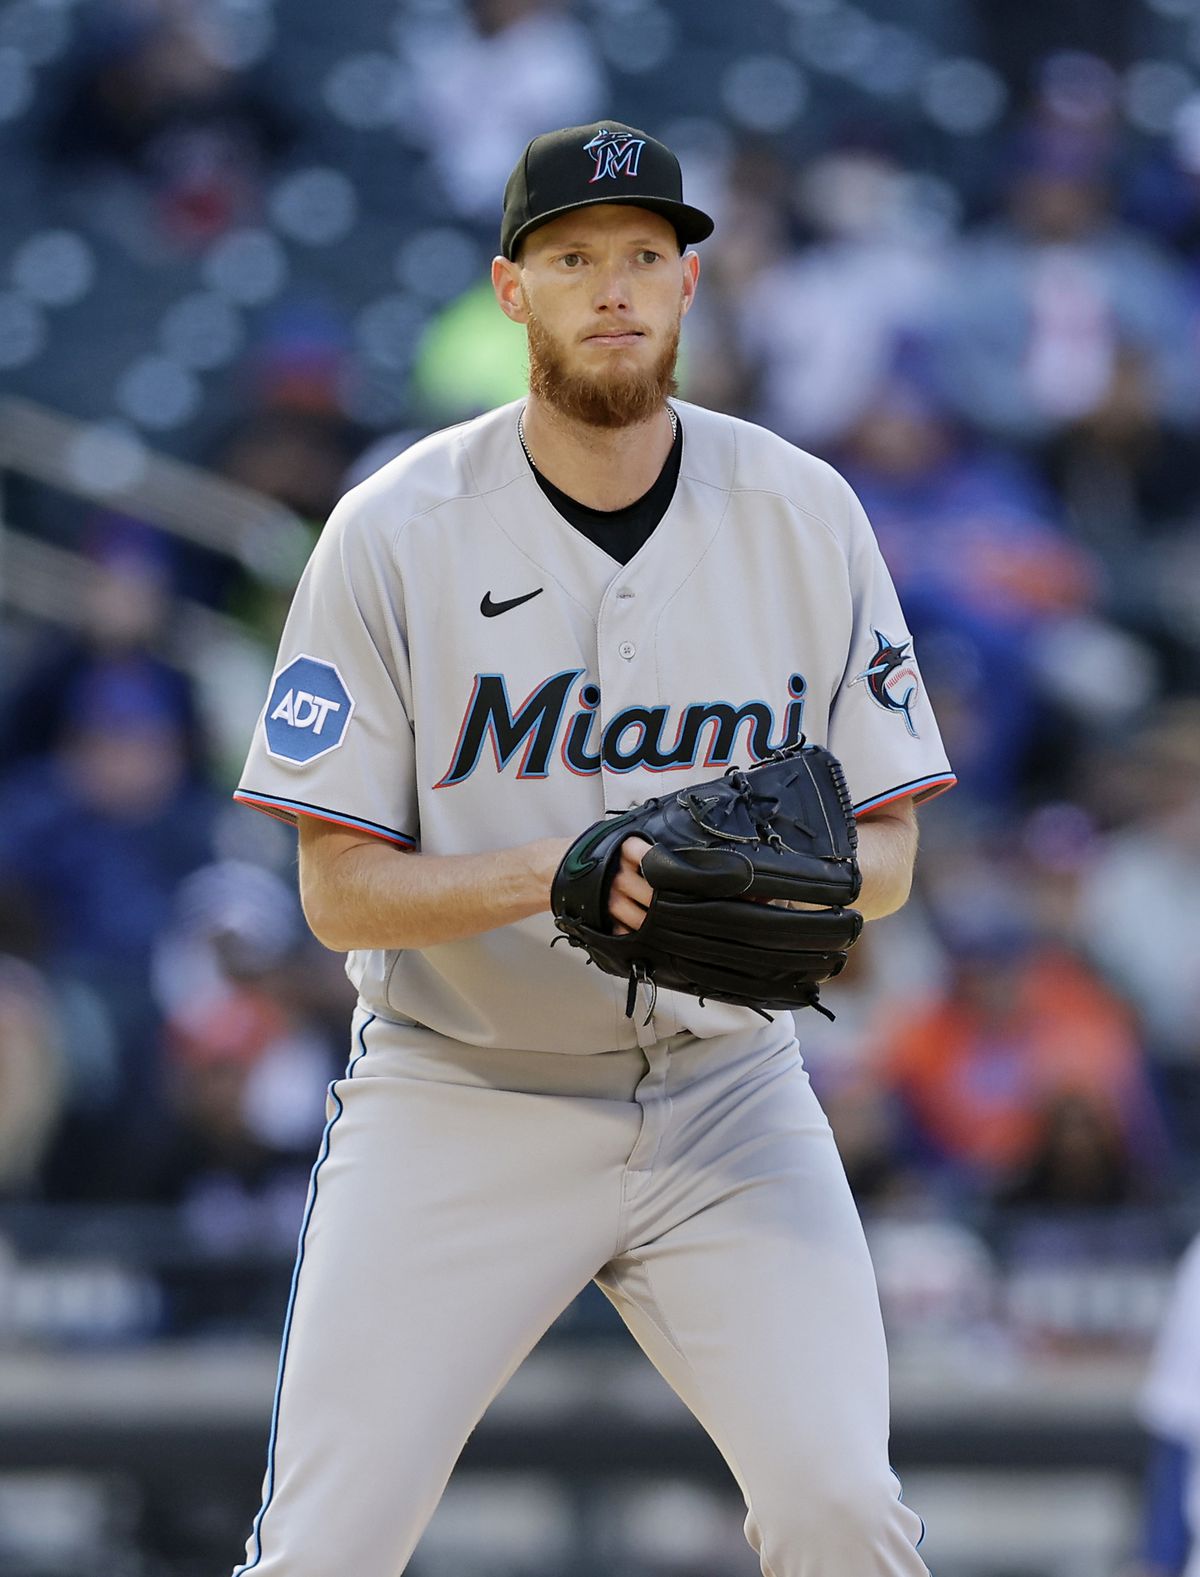 A.J. Puk #35 of the Miami Marlins in action against the New York Mets at Citi Field on April 09, 2023 in New York City. The Marlins defeated the Mets 7-2.